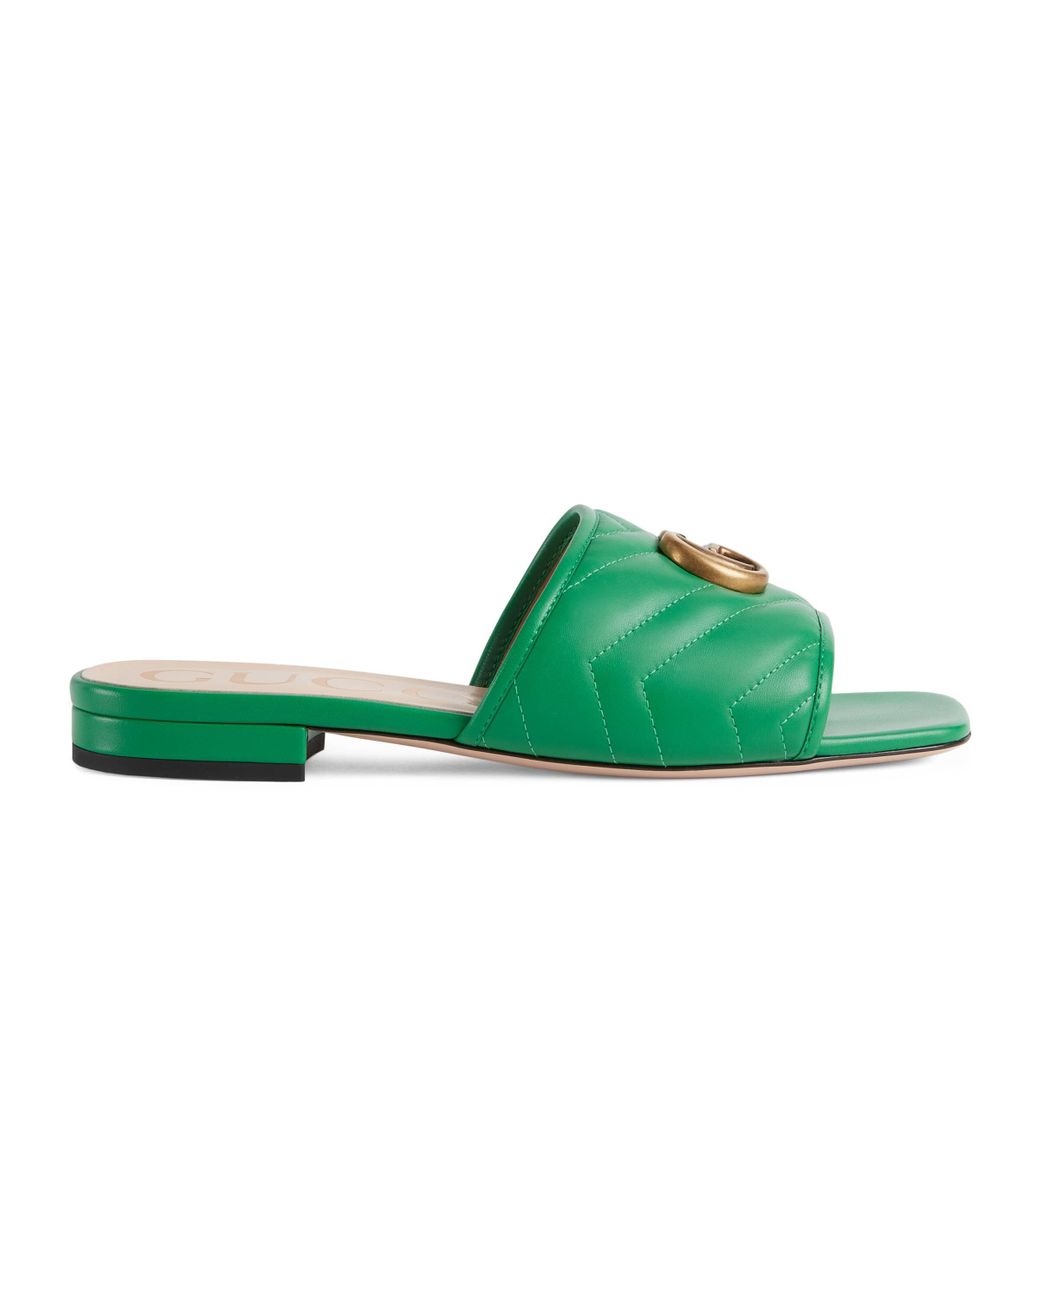 Gucci Leather Slide Sandal With Double G in Green - Lyst